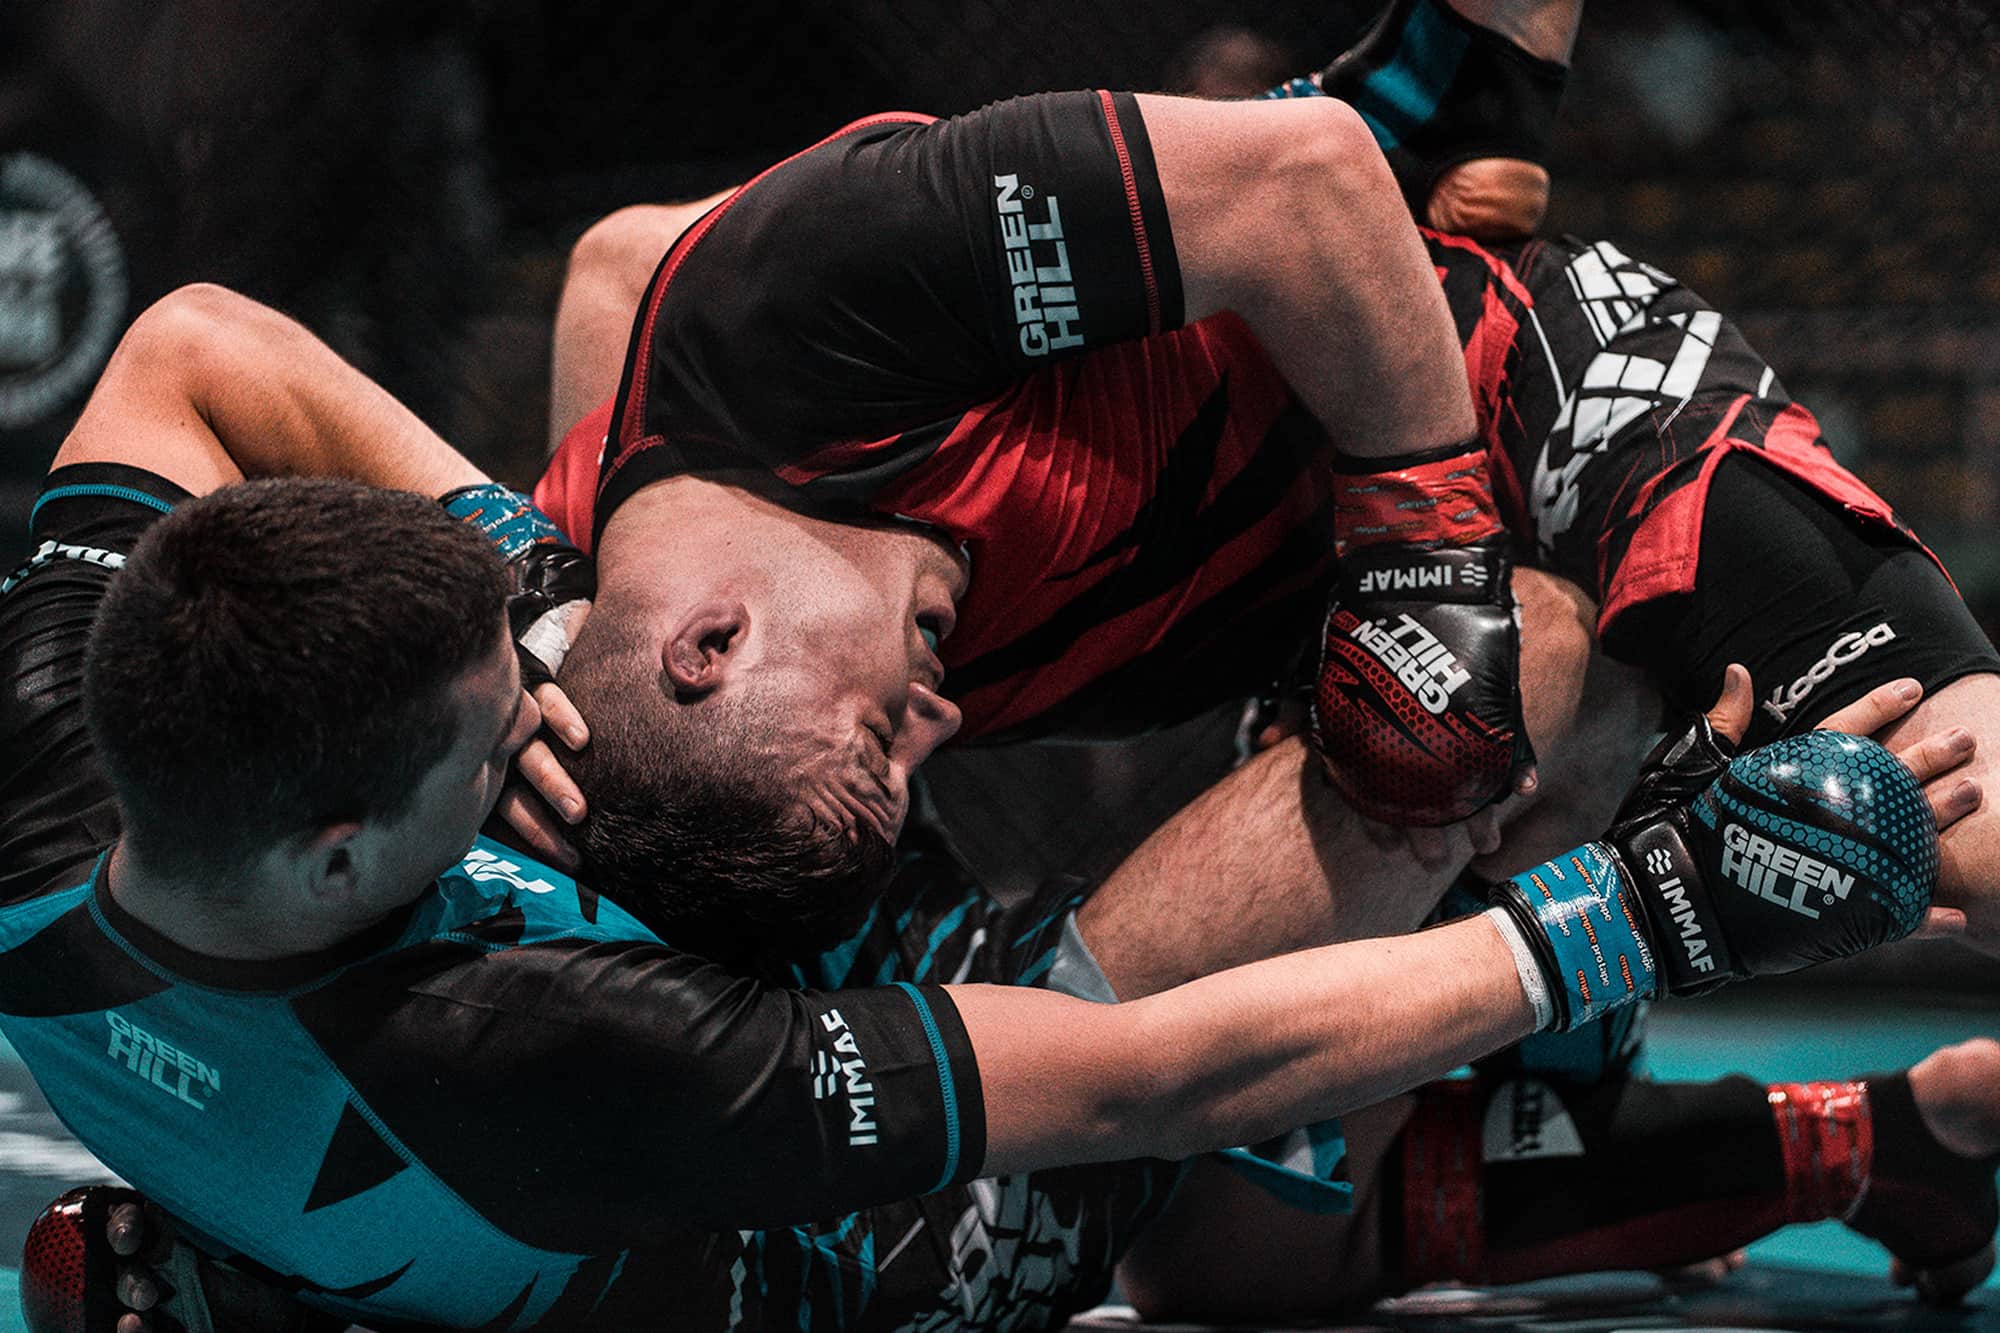 IMMAF CEO comments on Council of Europe’s new recommendations on Martial Arts & Combat Sports